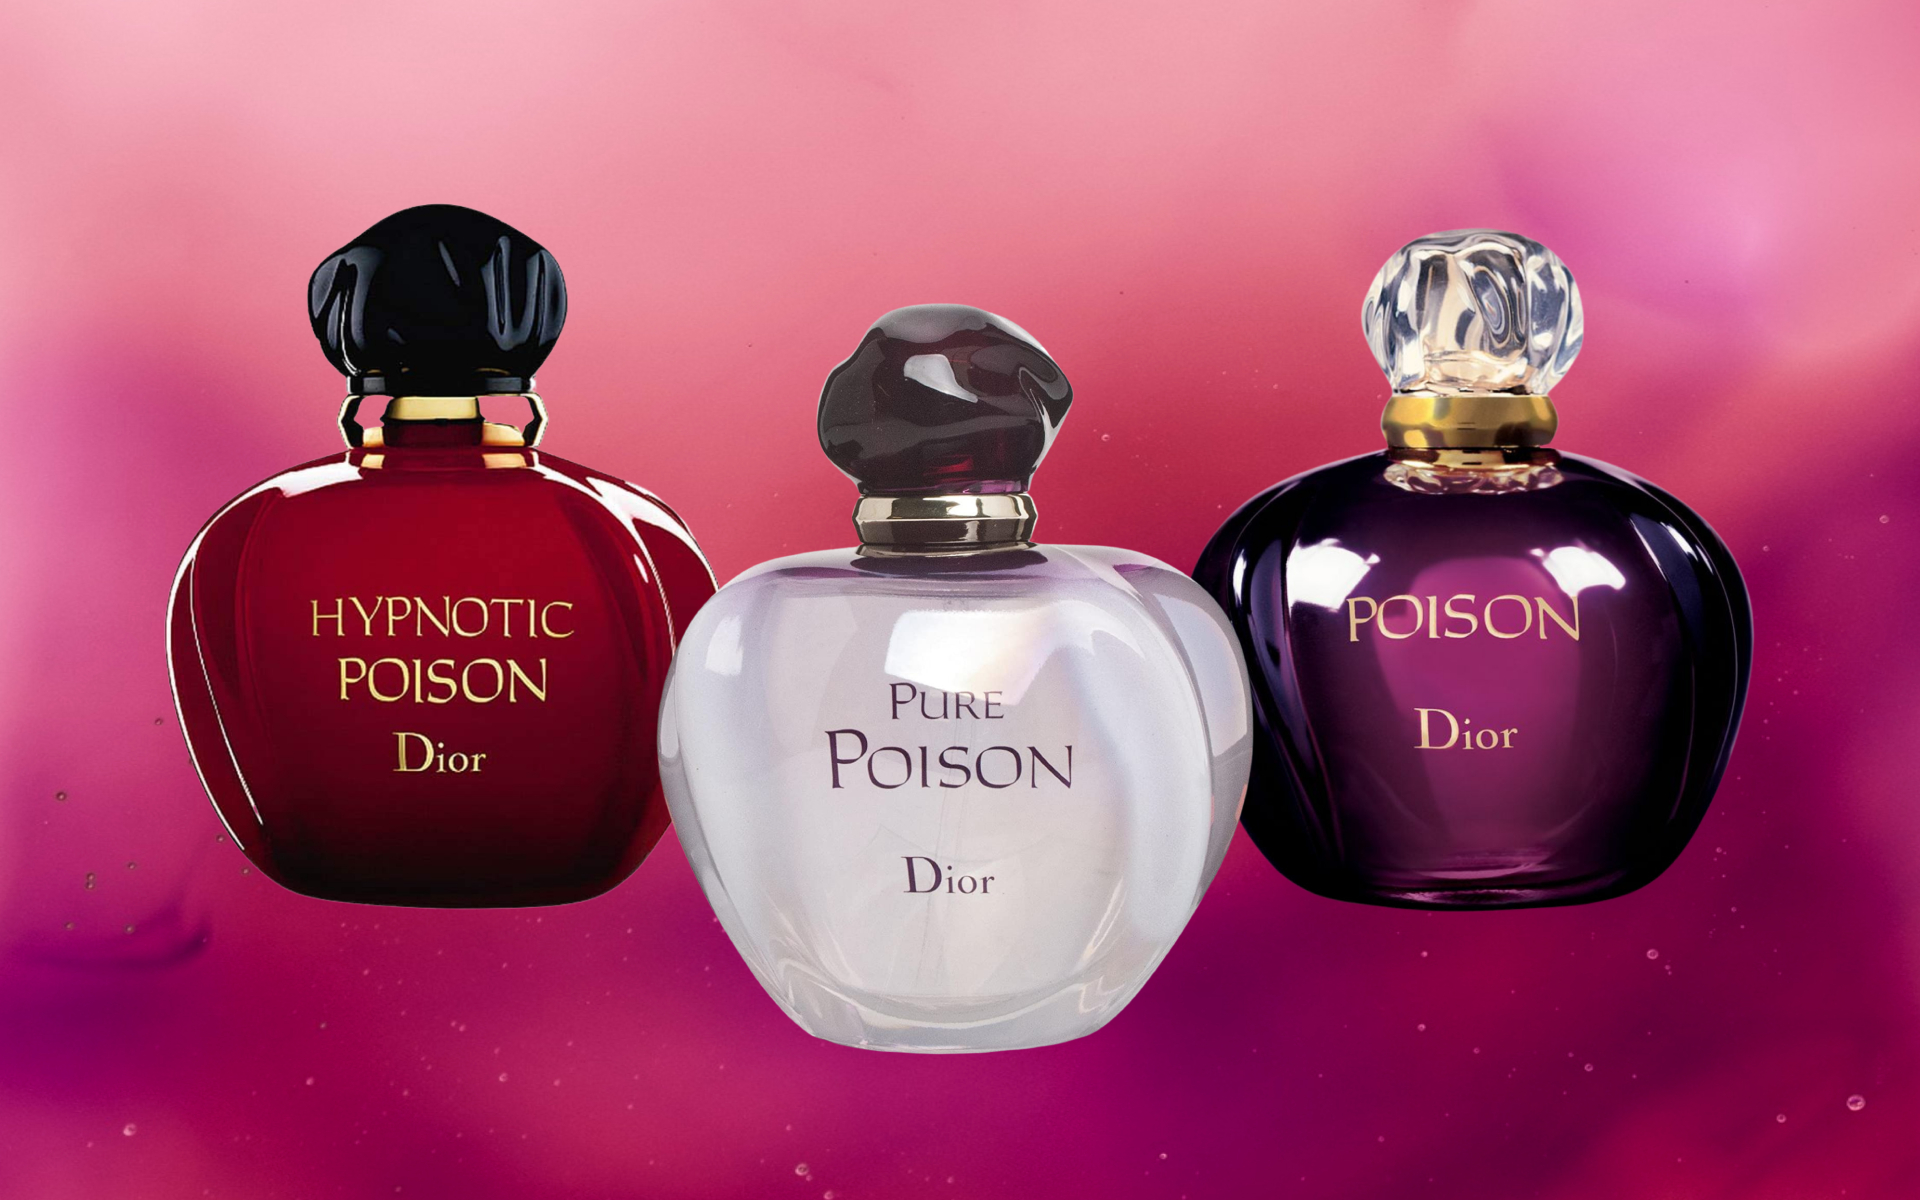 What Perfume does Adele wear